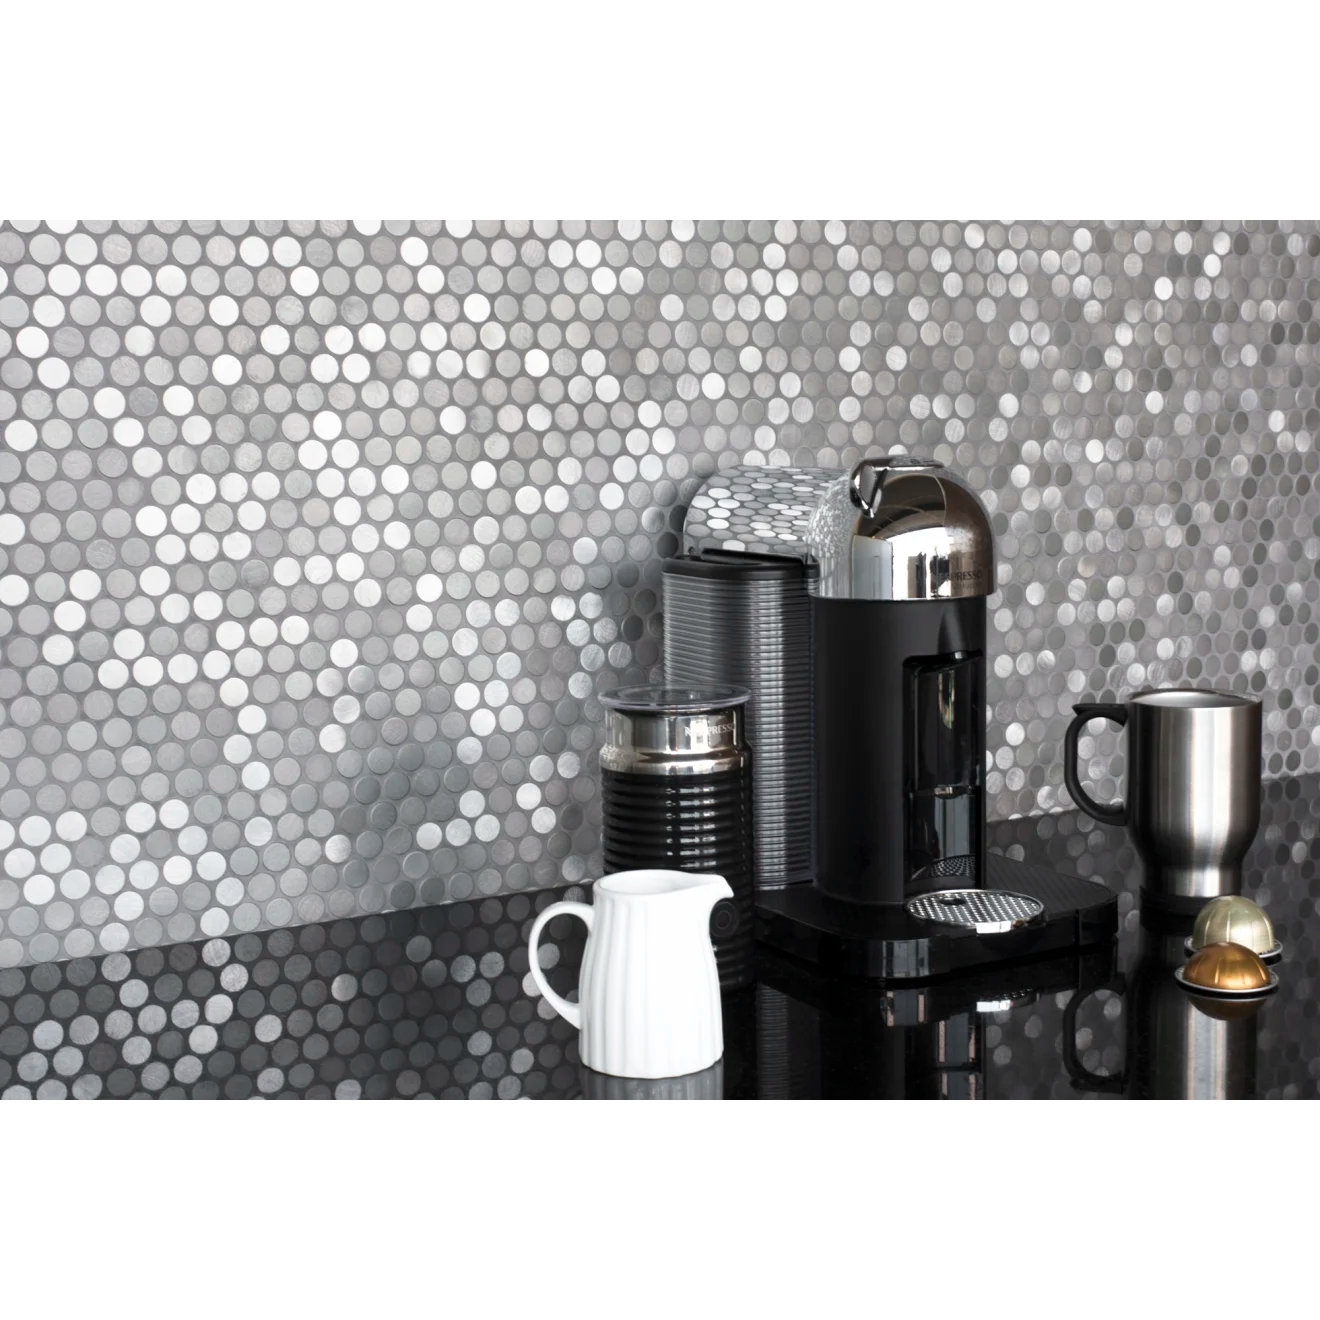 Polished black granite countertop with coffee maker and silver mug placed on top, against Penny round tile in the color Iron. 